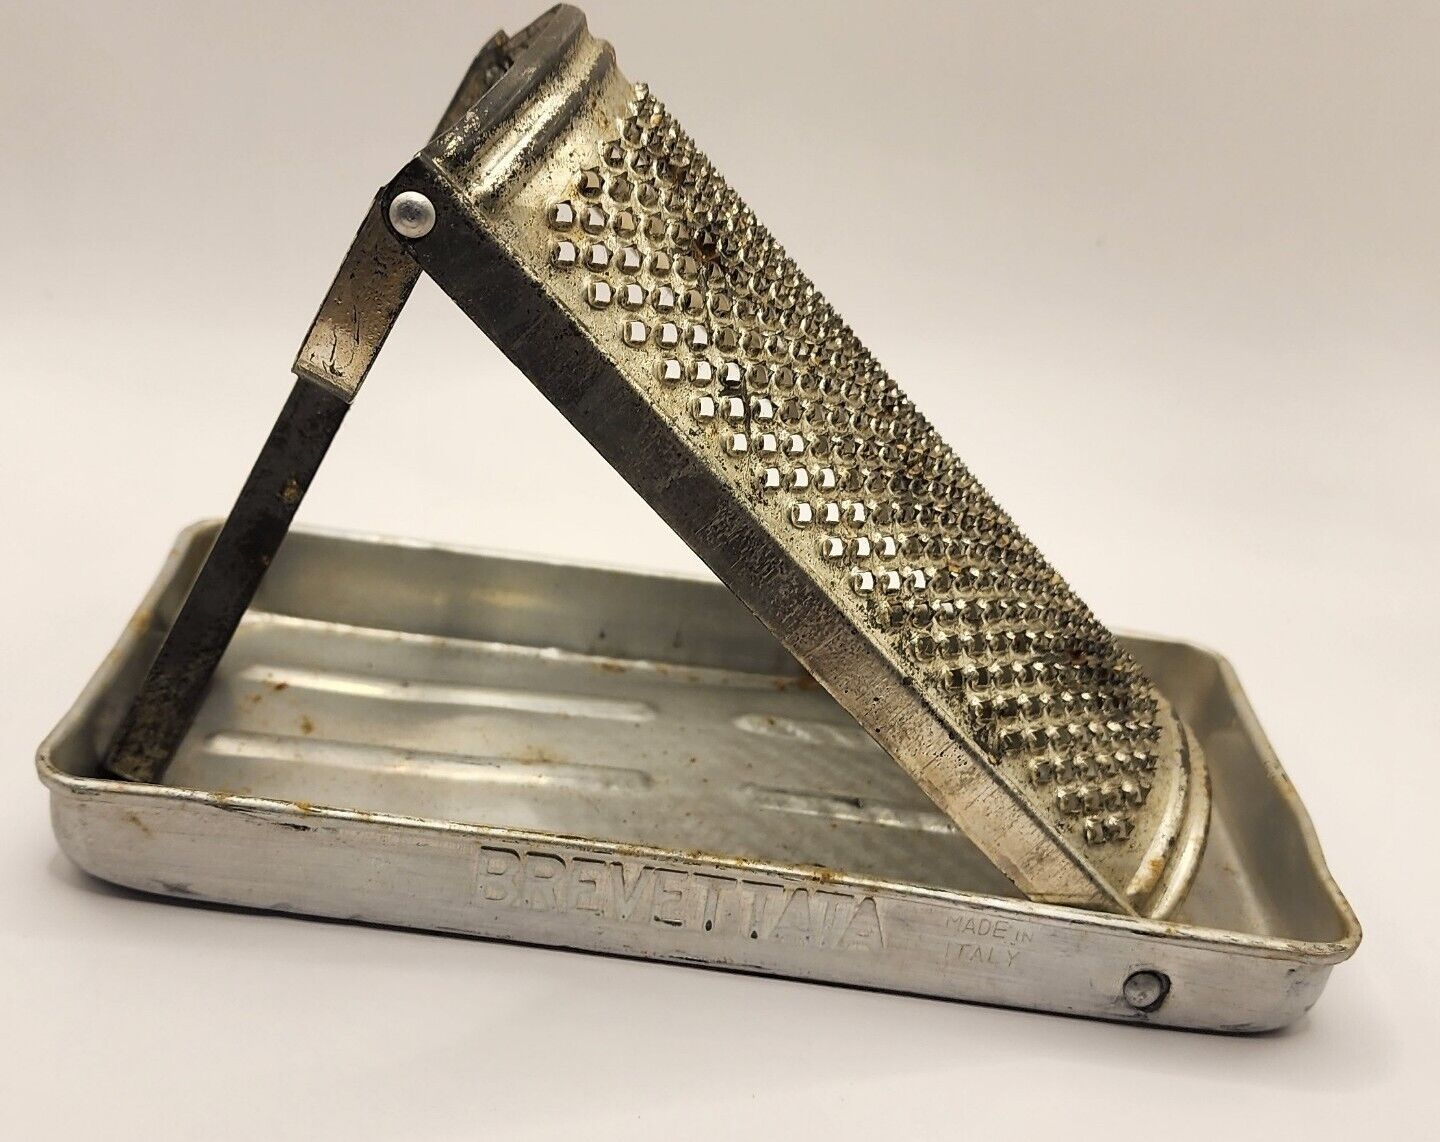 Brevettata Vintage Cheese Grater Made In Italy